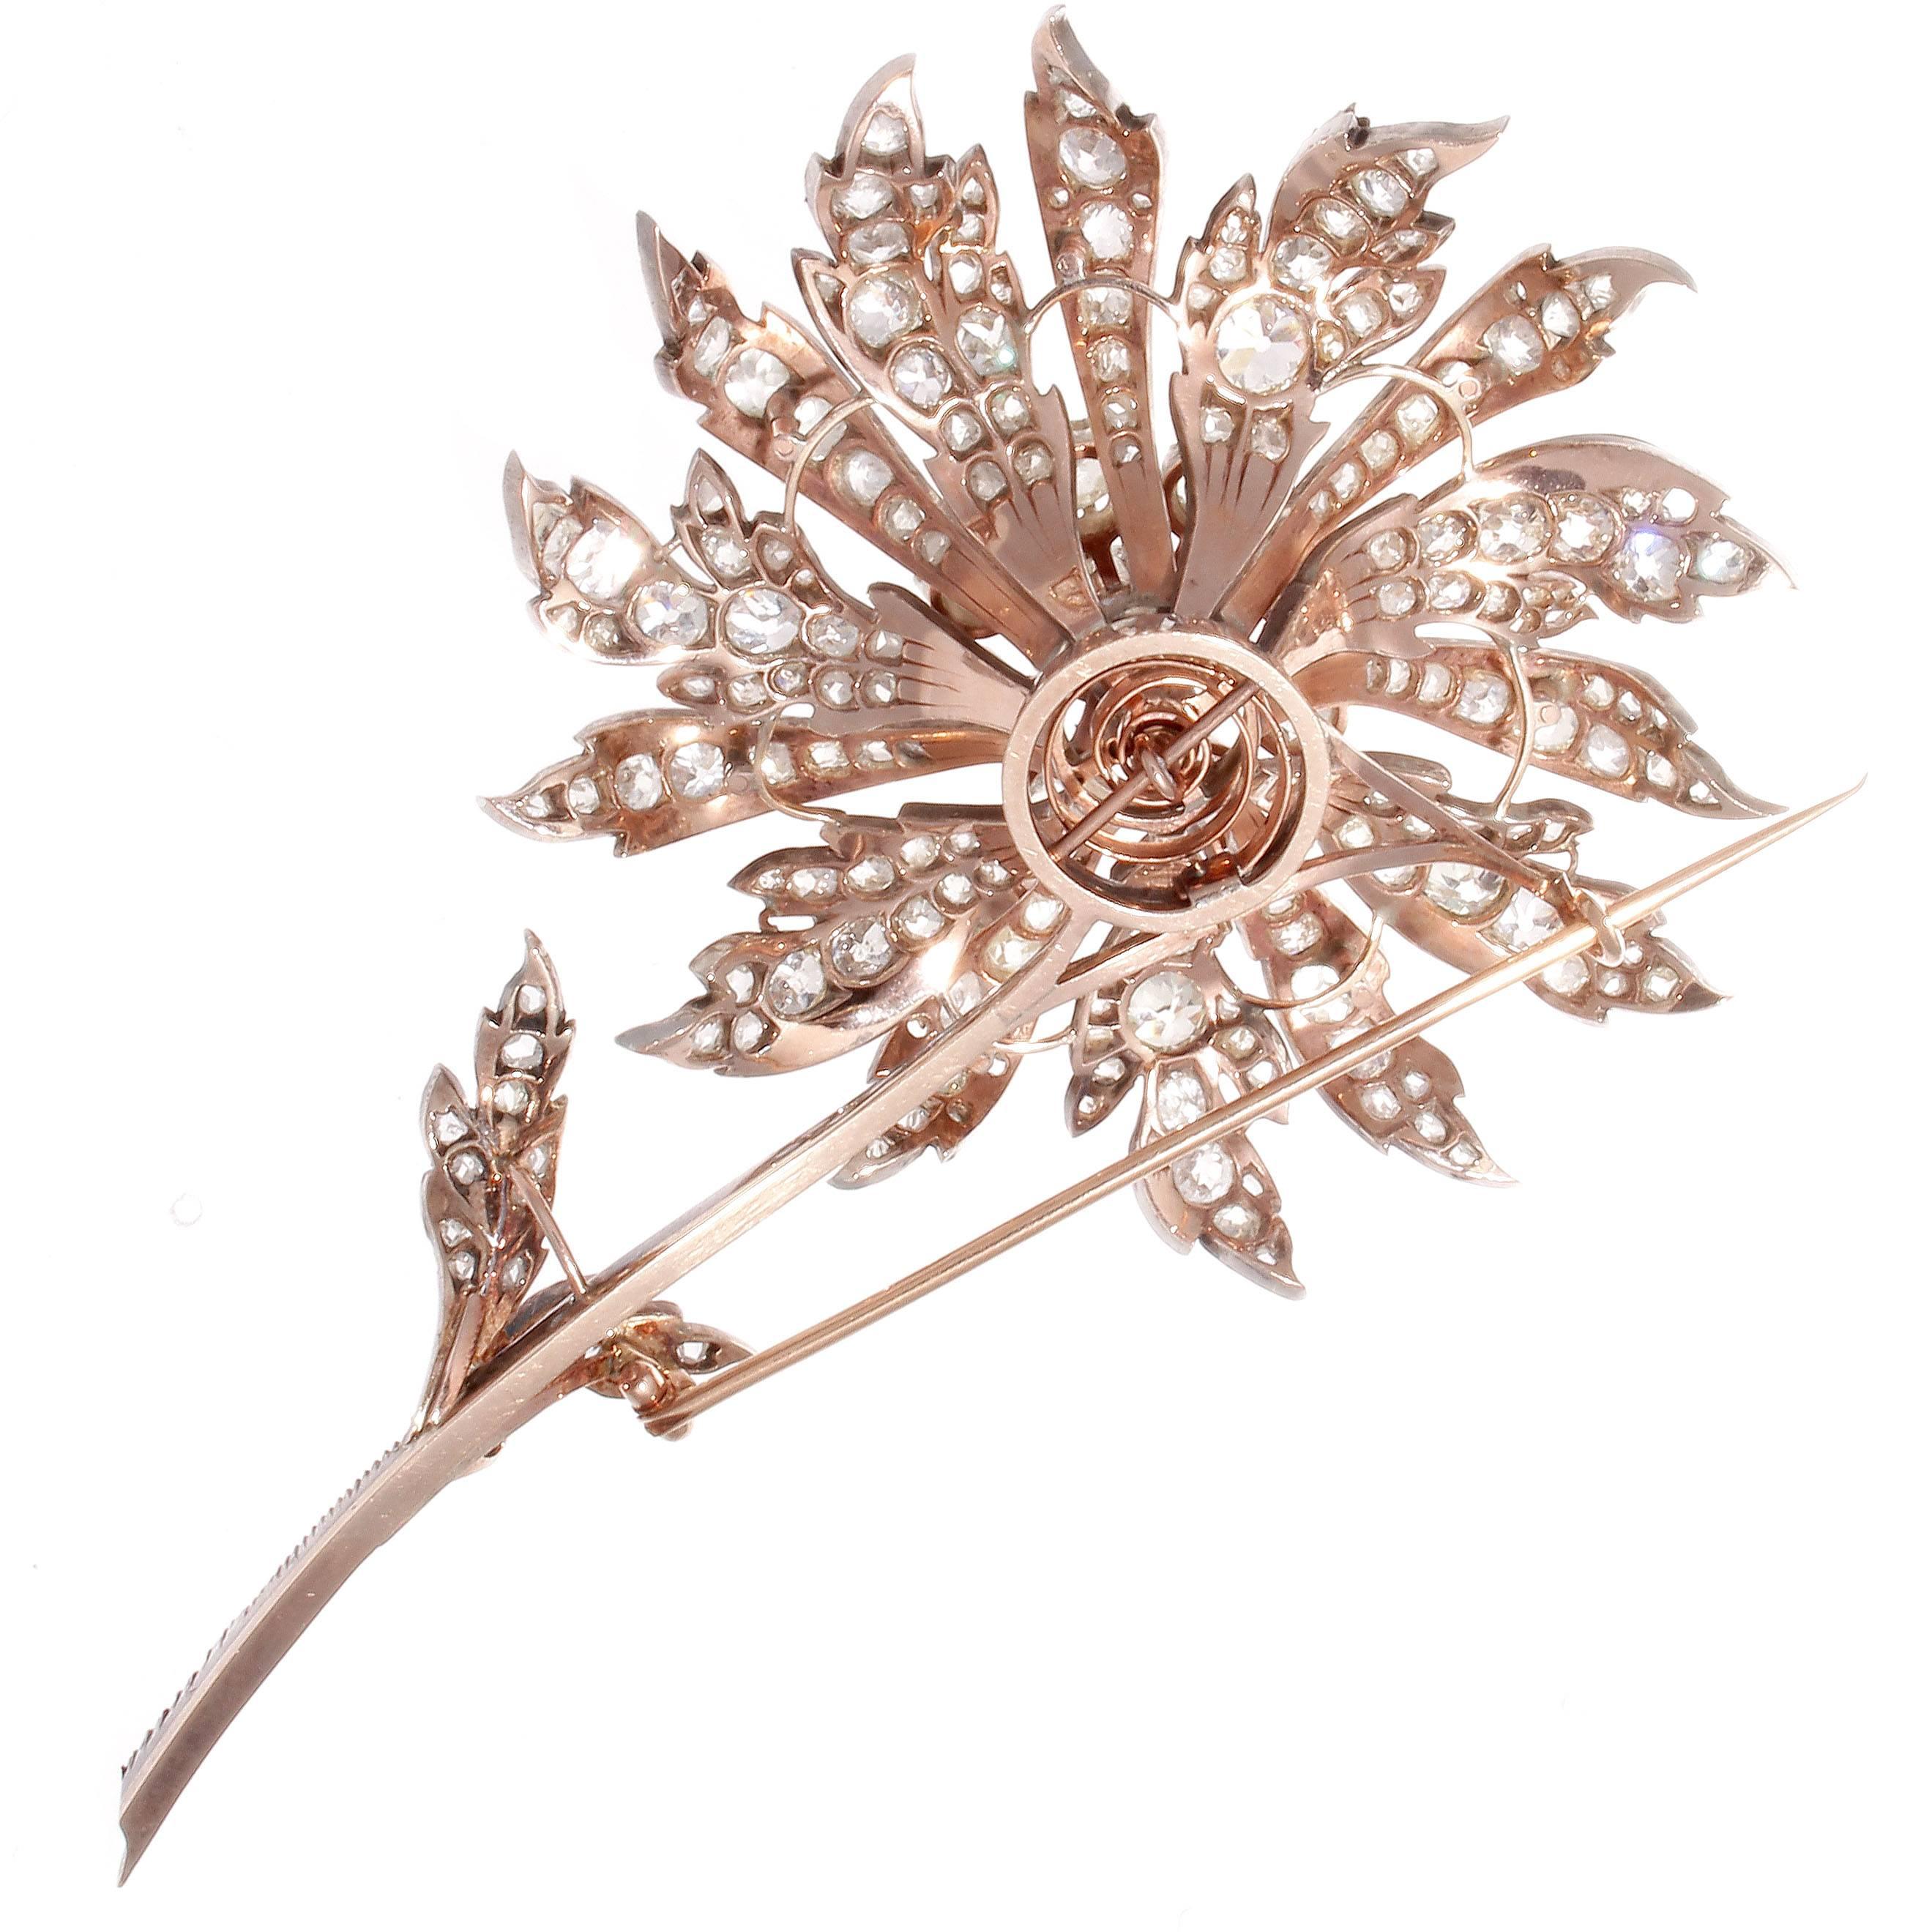 Created with approximately 23 carats of old miner diamonds, all original to the piece. The entremble is stunning and extremely well made. The pin is made to be unscrewed and the flower may be worn as a pendant. A truly outstanding and spectacular